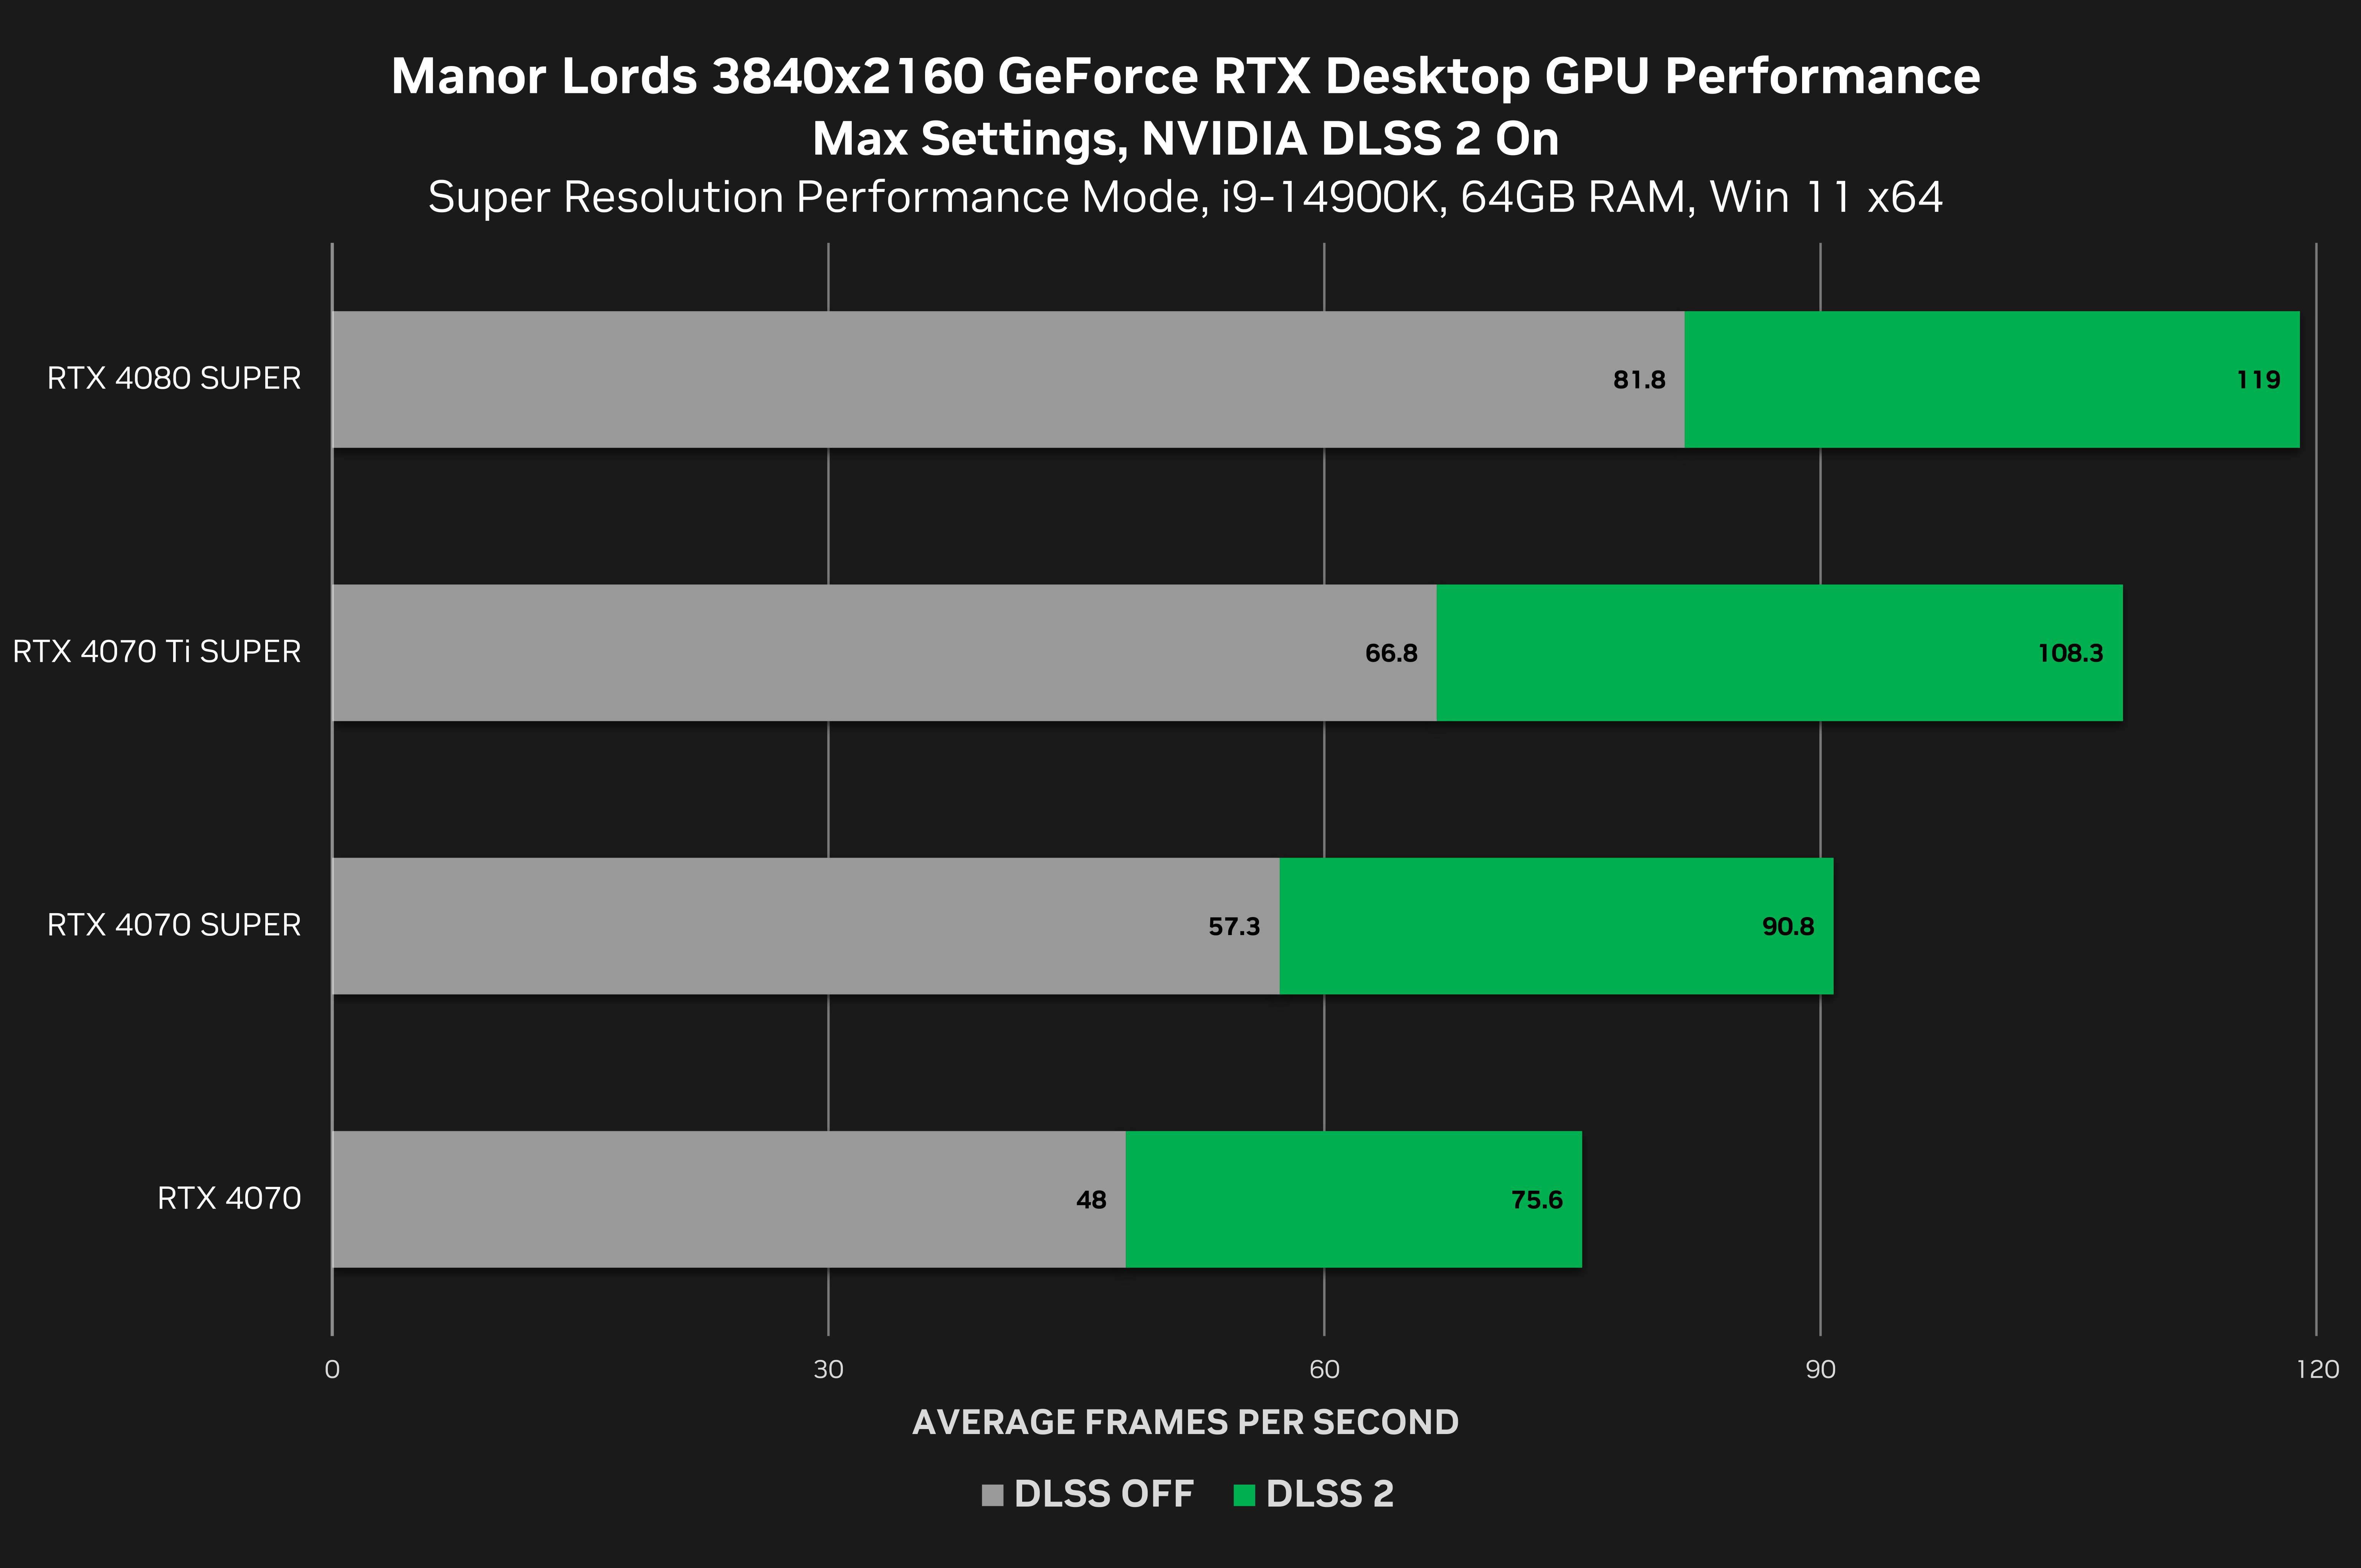 Manor Lords DLSS2 Performance Gains On The RTX 4000 Series